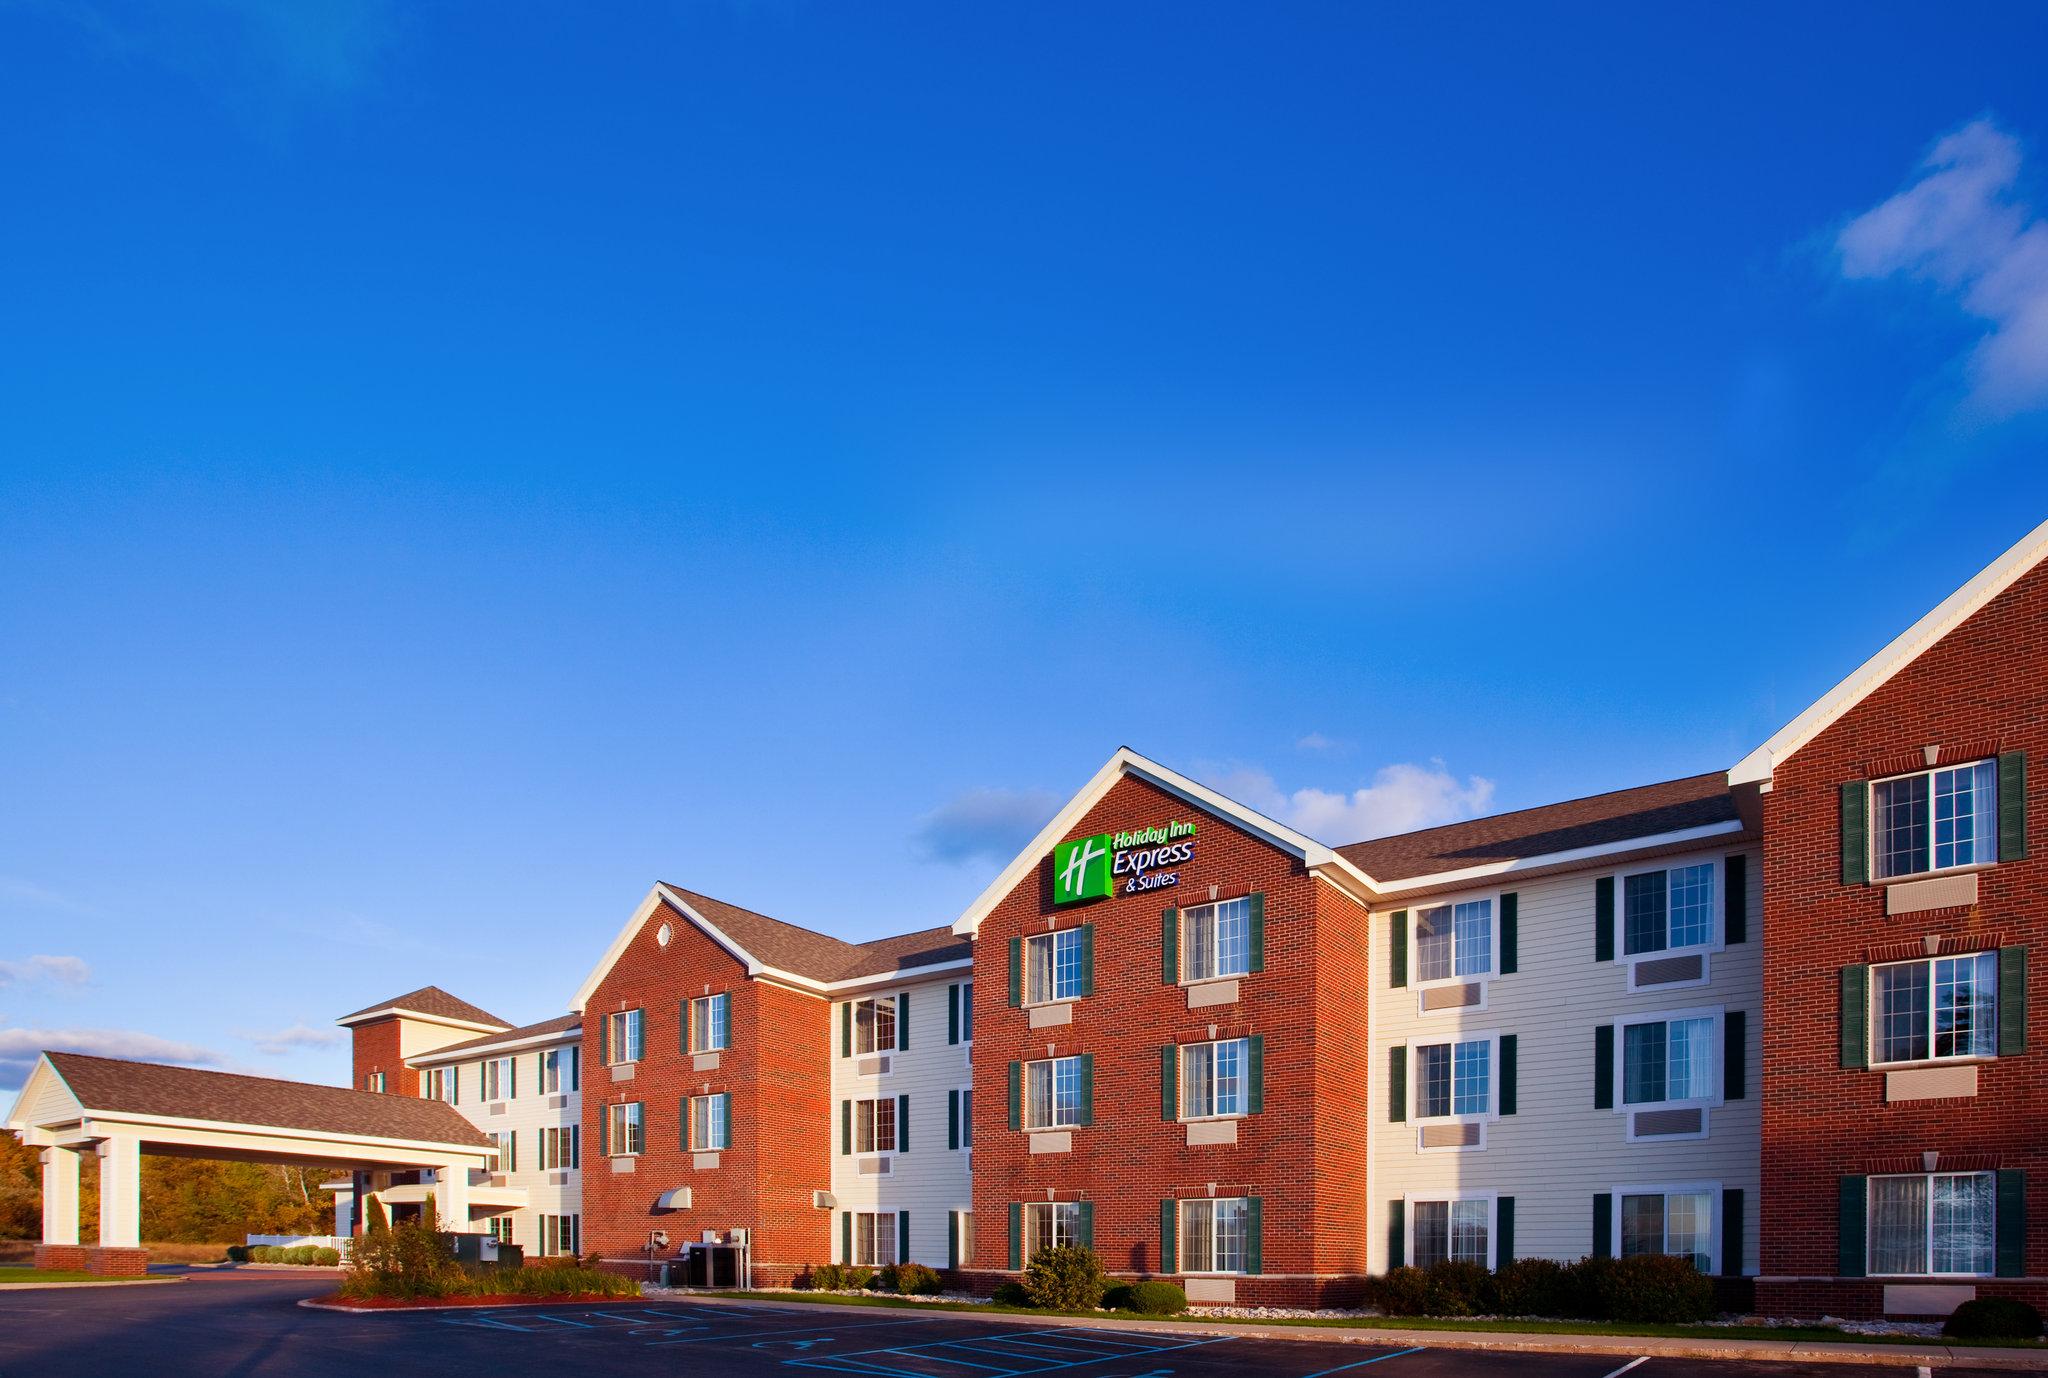 Holiday Inn Express Hotel & Suites Acme Traverse City in Traverse City, MI